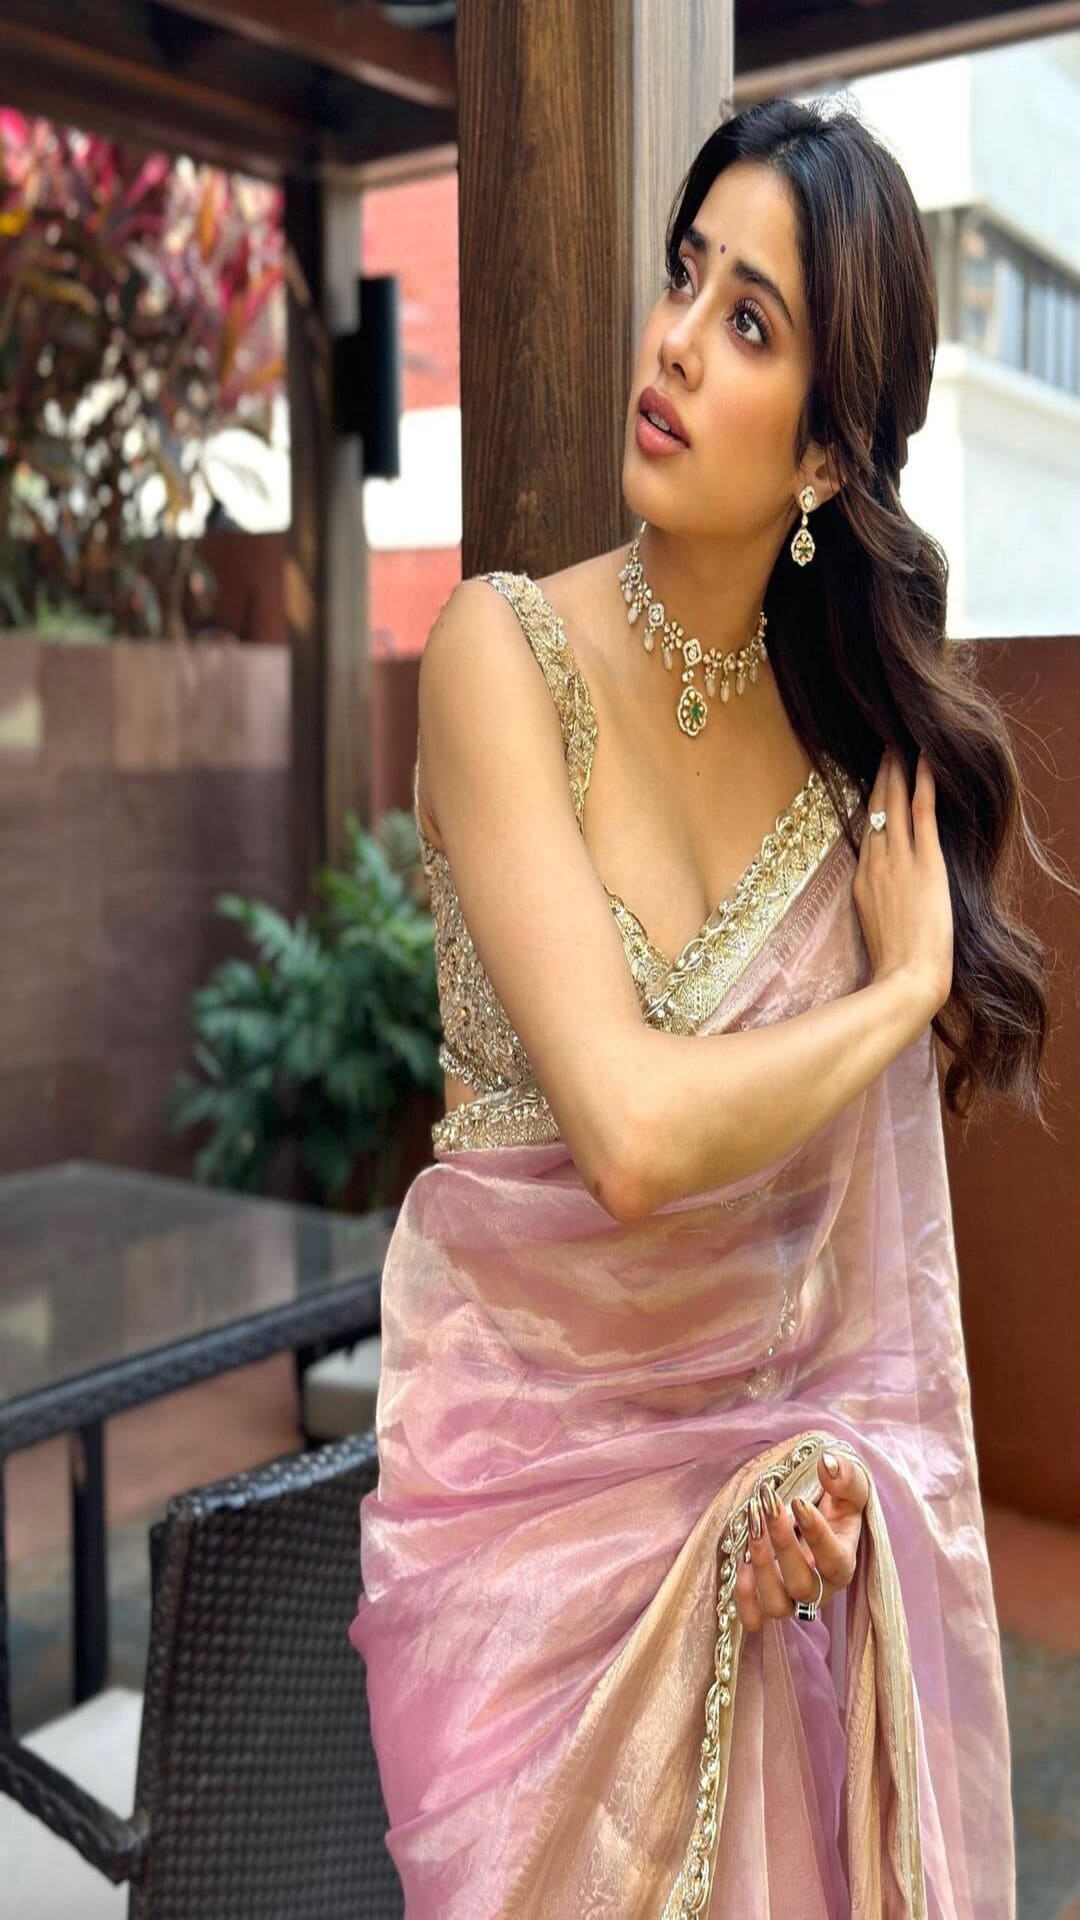 Latest Indian Saree Trends Of 2020 To Flaunt Fashion Style